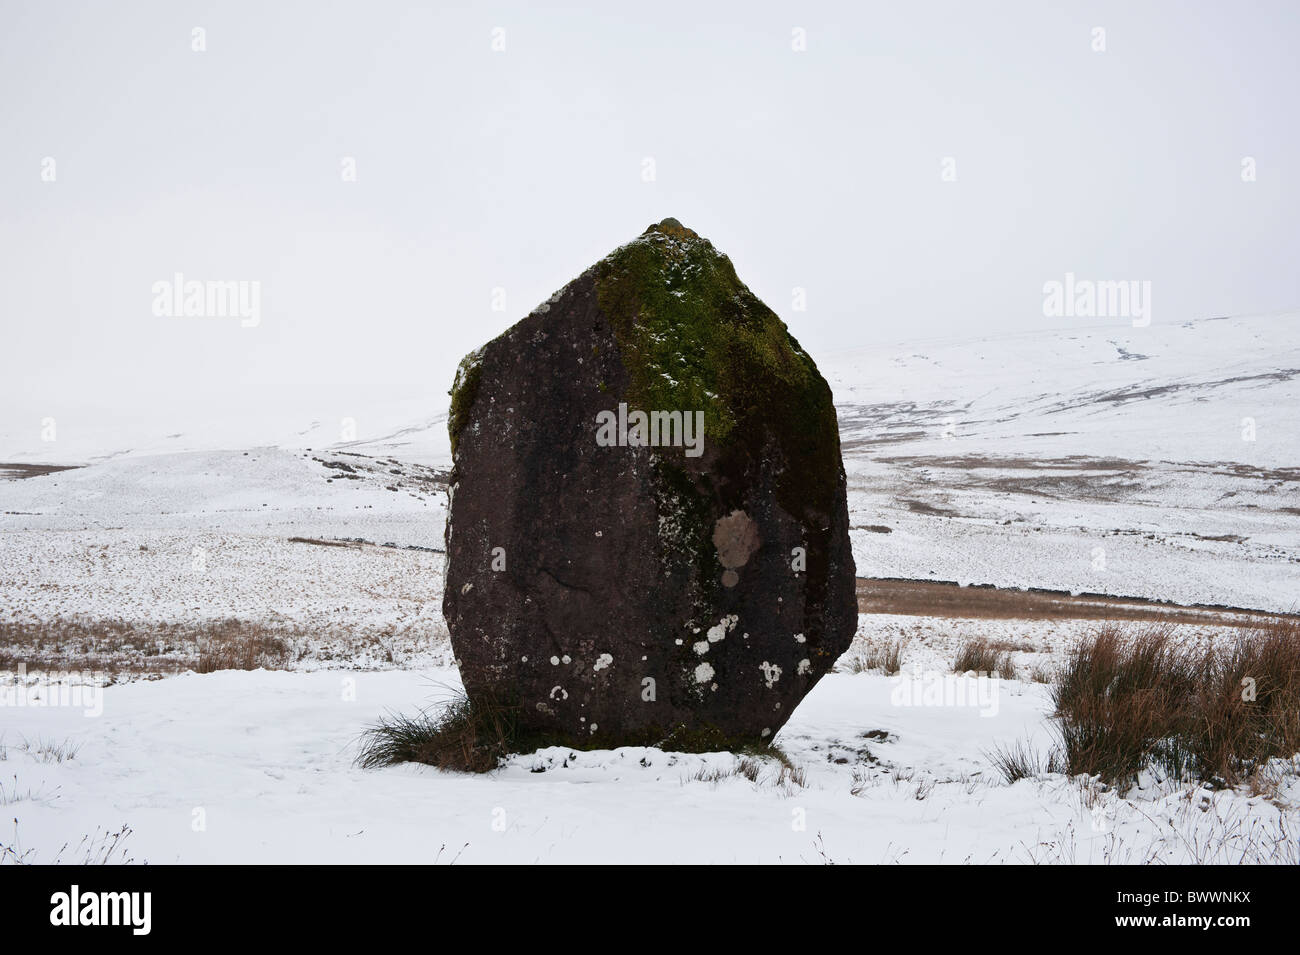 Mean Llia standing stone in winter, Brecon Beacons national park, Wales Stock Photo